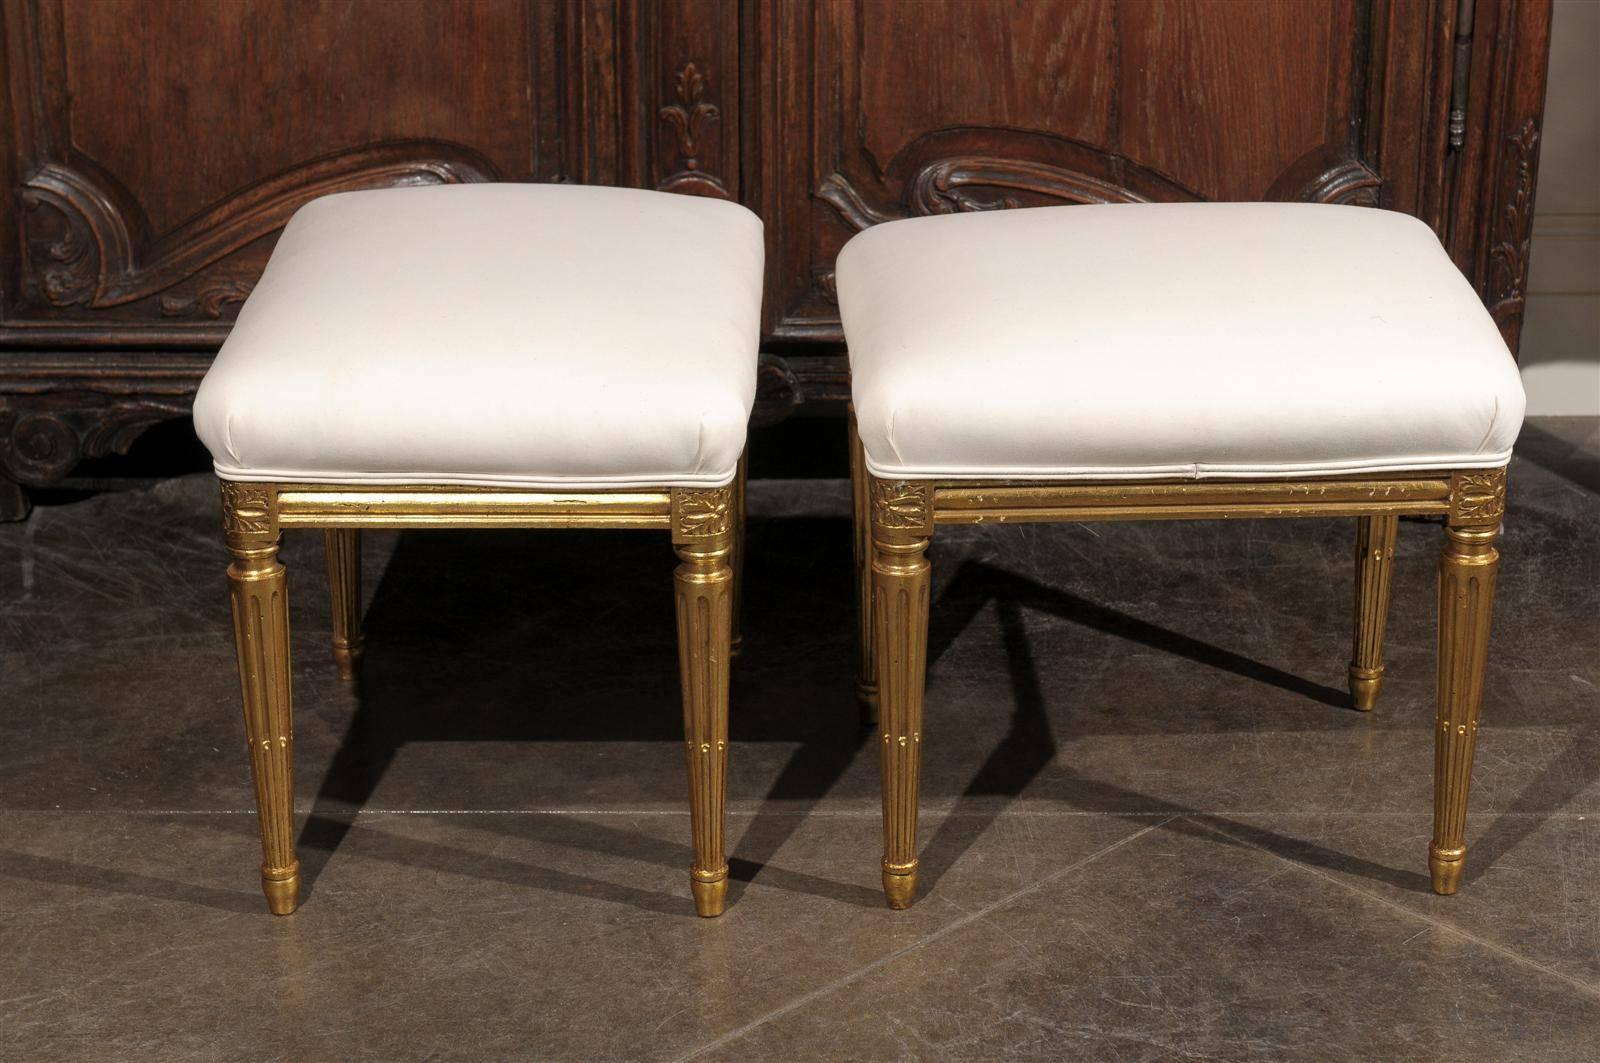 Pair of French Early 20th Century Upholstered Stools with Giltwood Legs For Sale 3